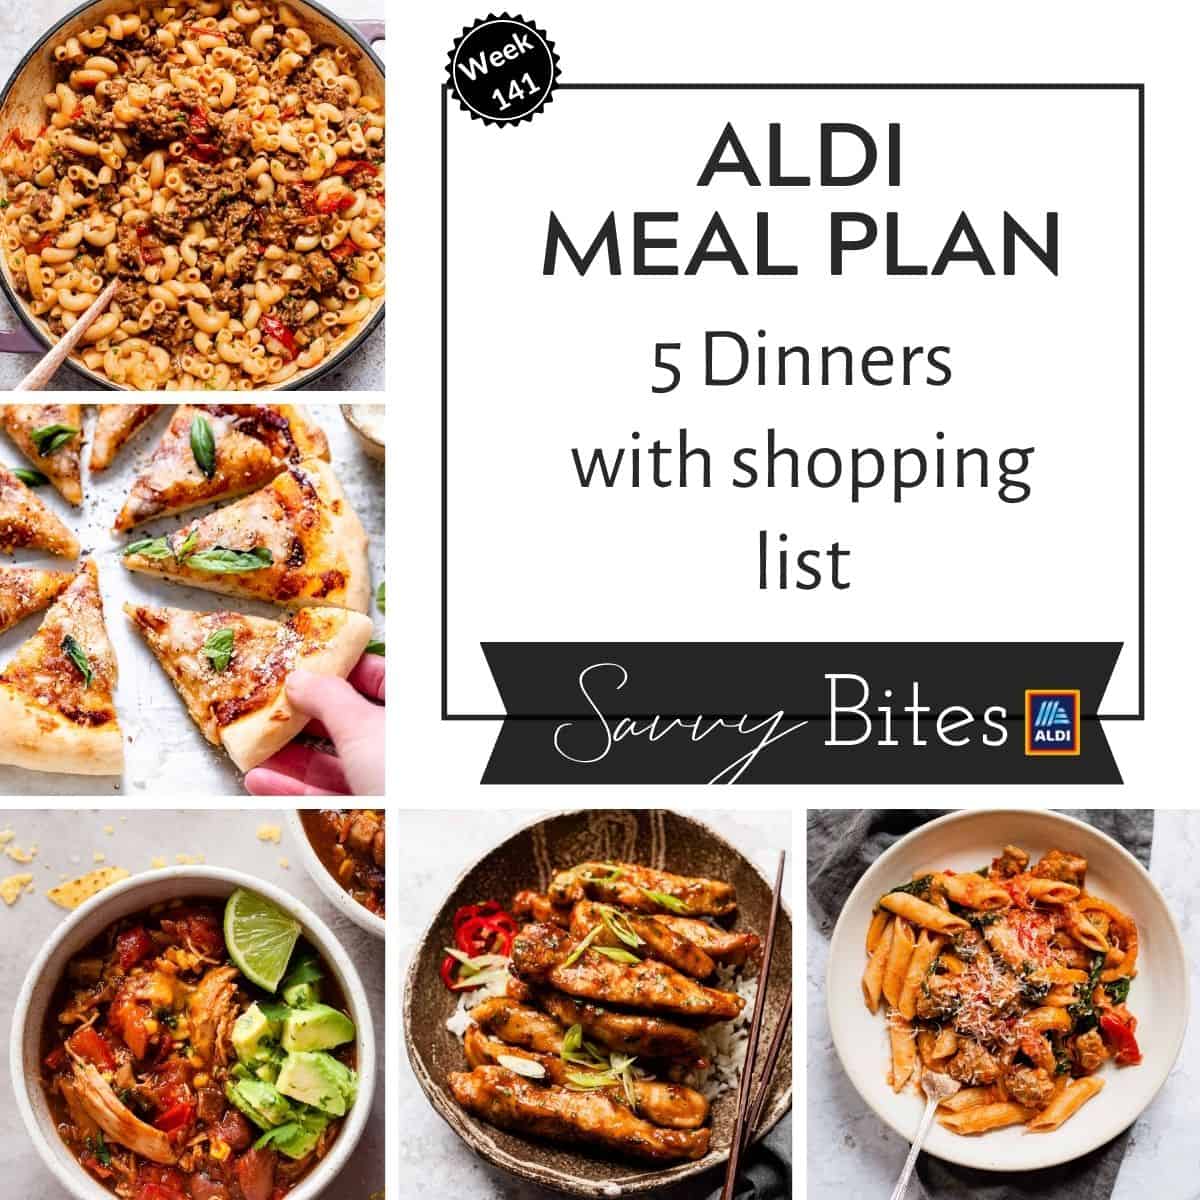 Aldi meal plan 141 featured image collage.